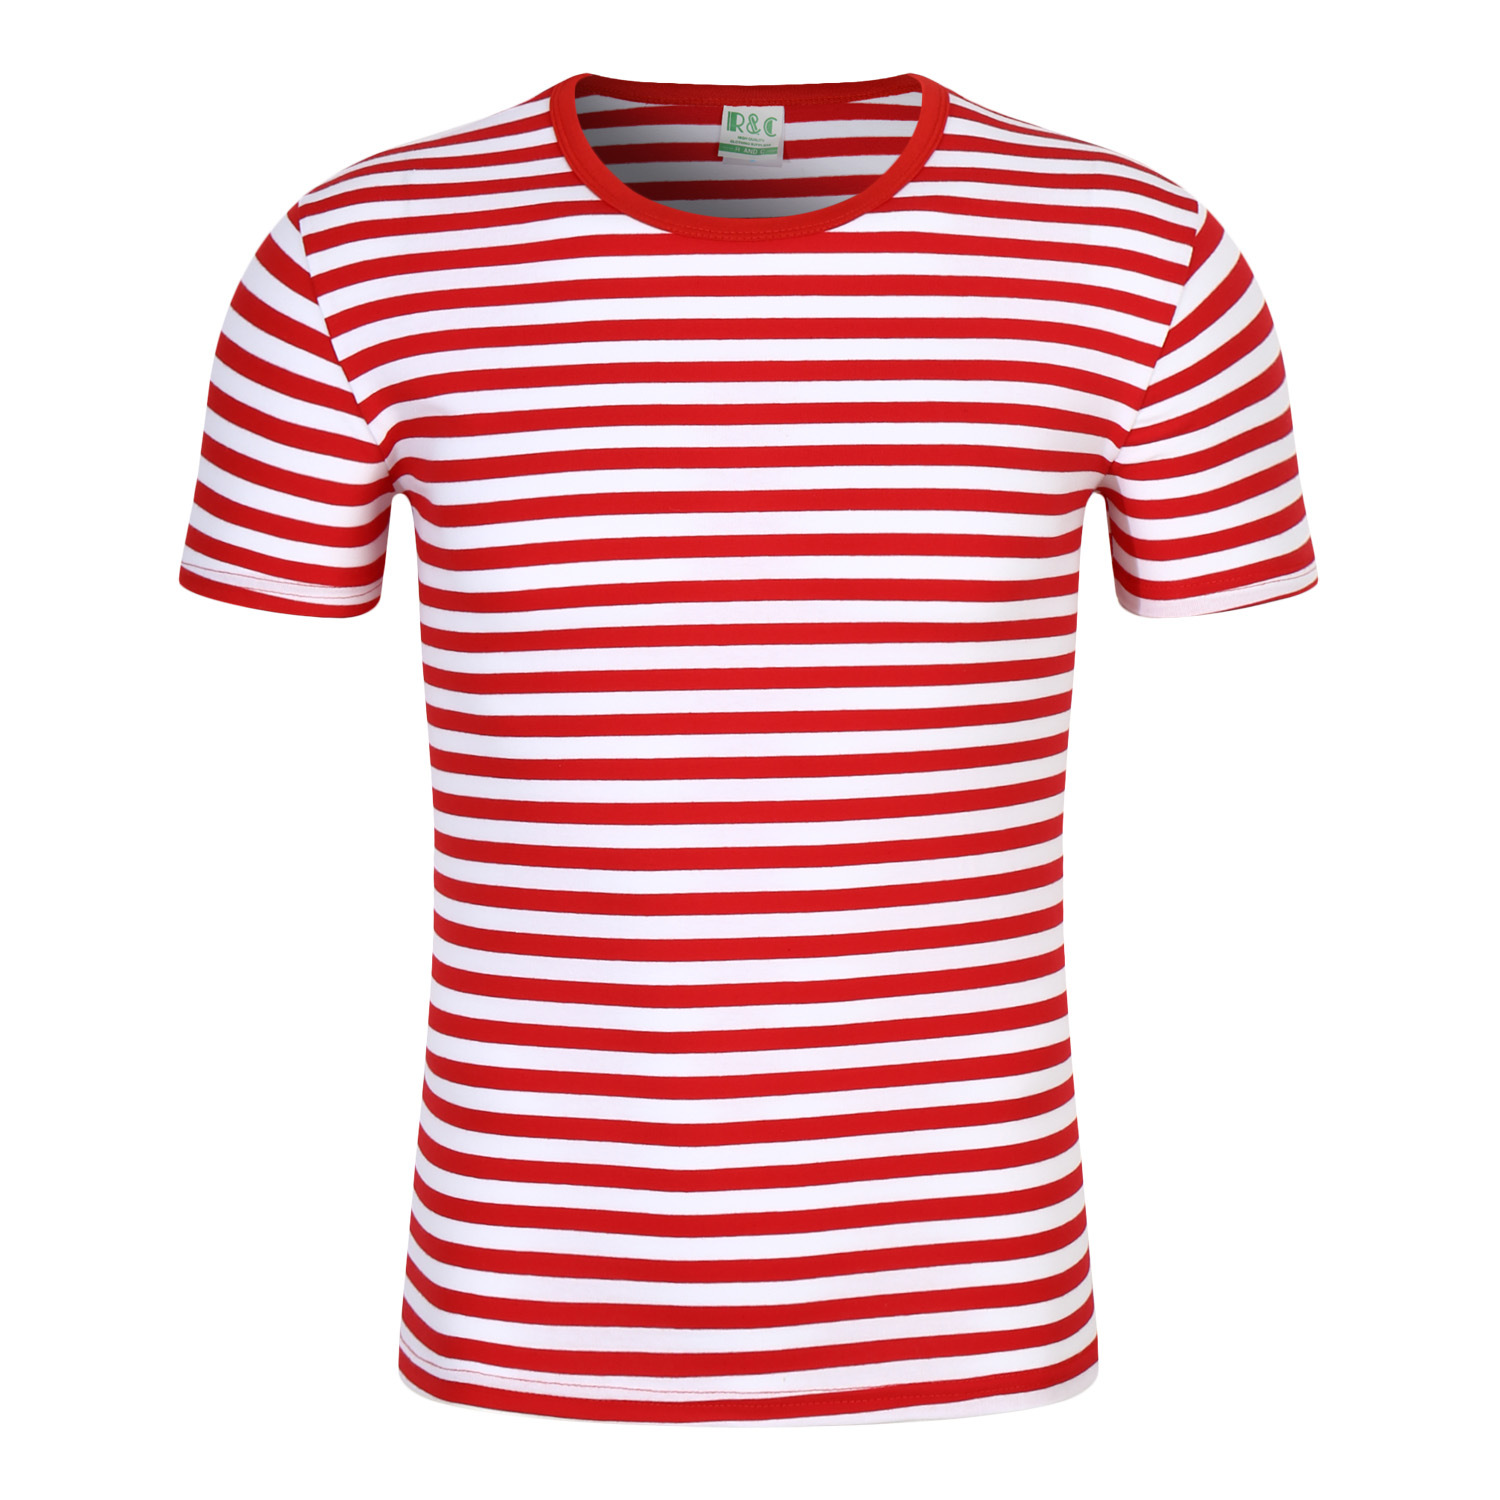 Navy-Striped Shirt Customized round Neck Short Sleeve Business Work Clothes Advertising Shirt DIY Outdoor Sports T-shirt Printed Logo